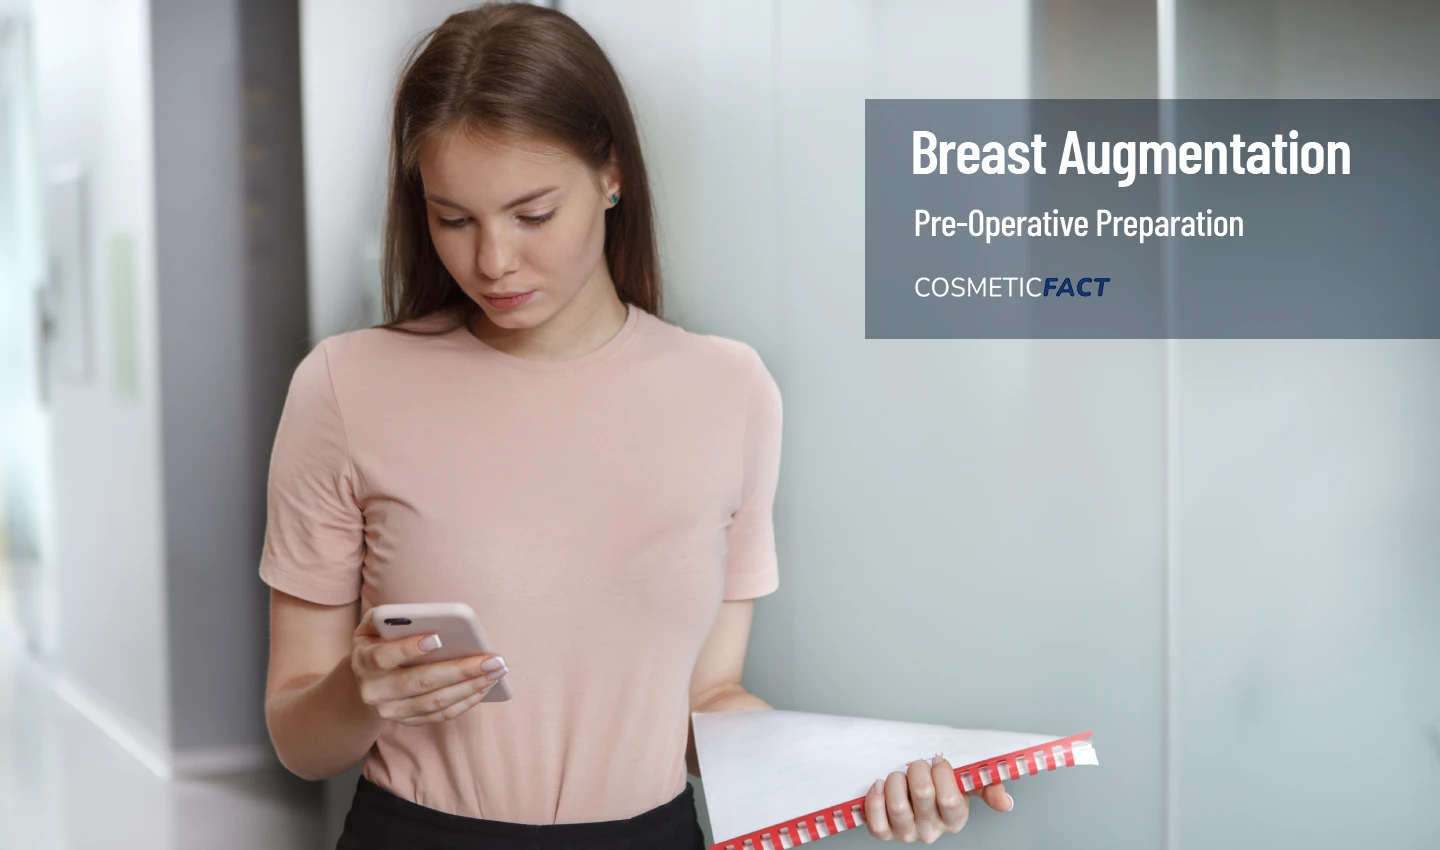 A woman holding a checklist in her hand, preparing for breast augmentation surgery.